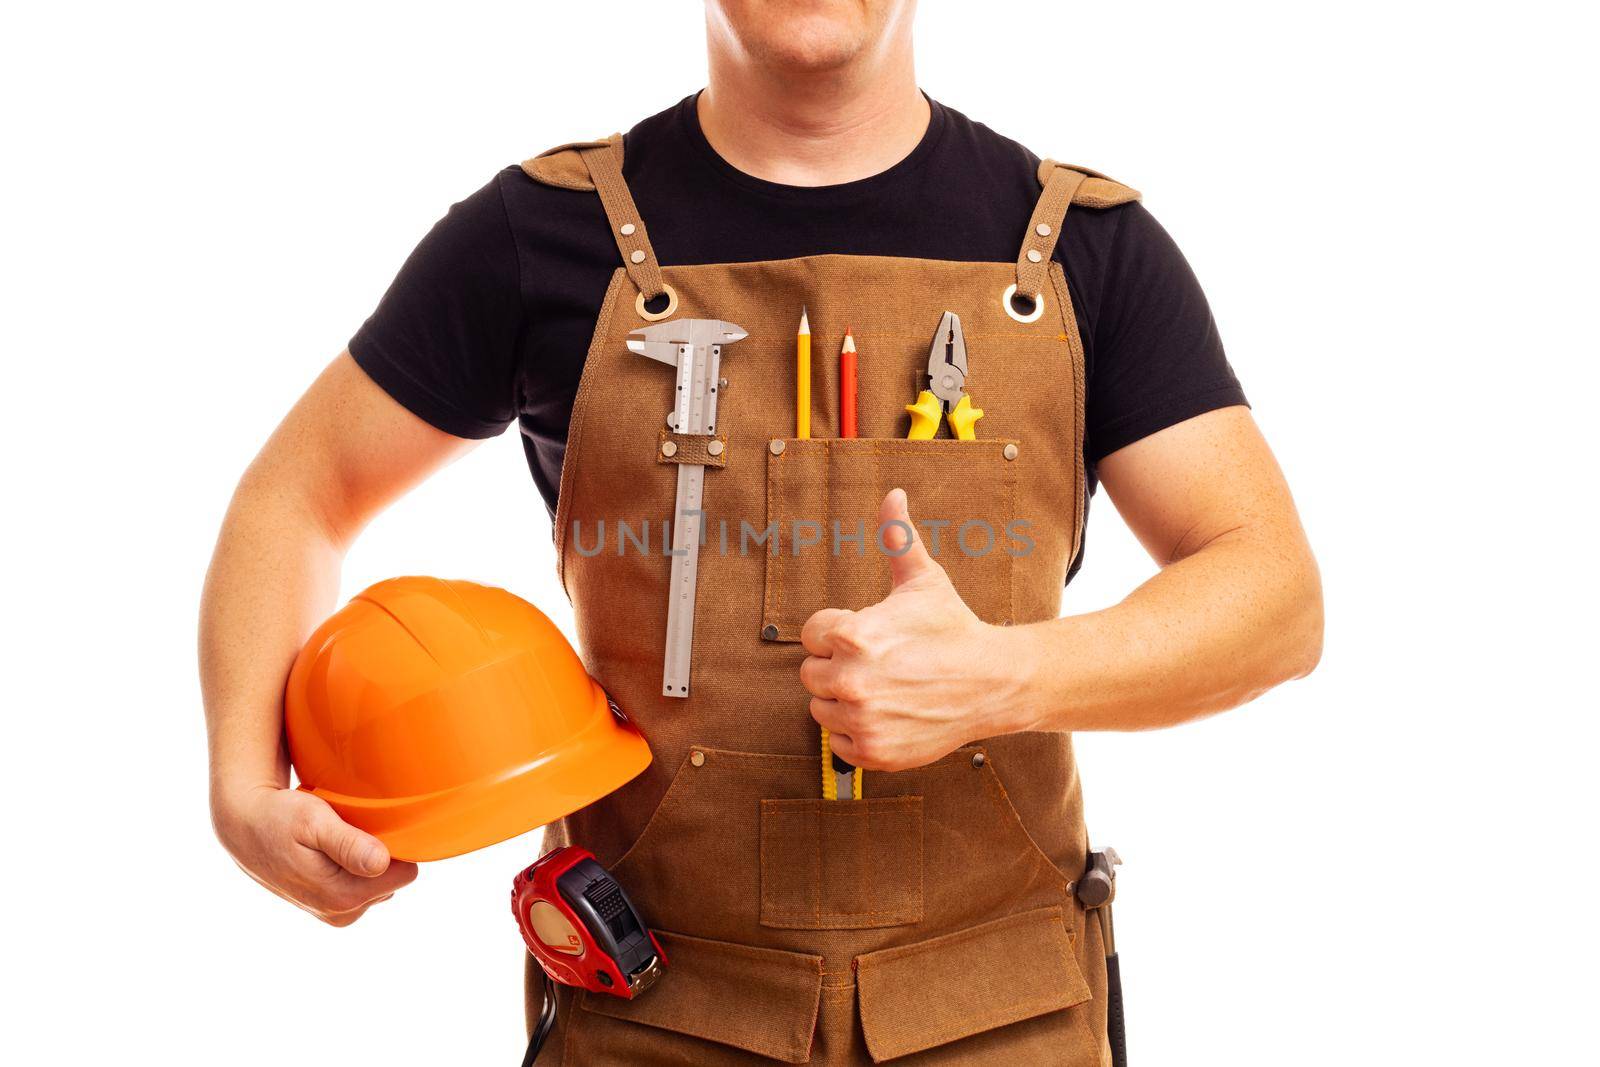 Contractor worker or carpenter in workers apron with tools and helmet holding thumbs up isolated on white background.